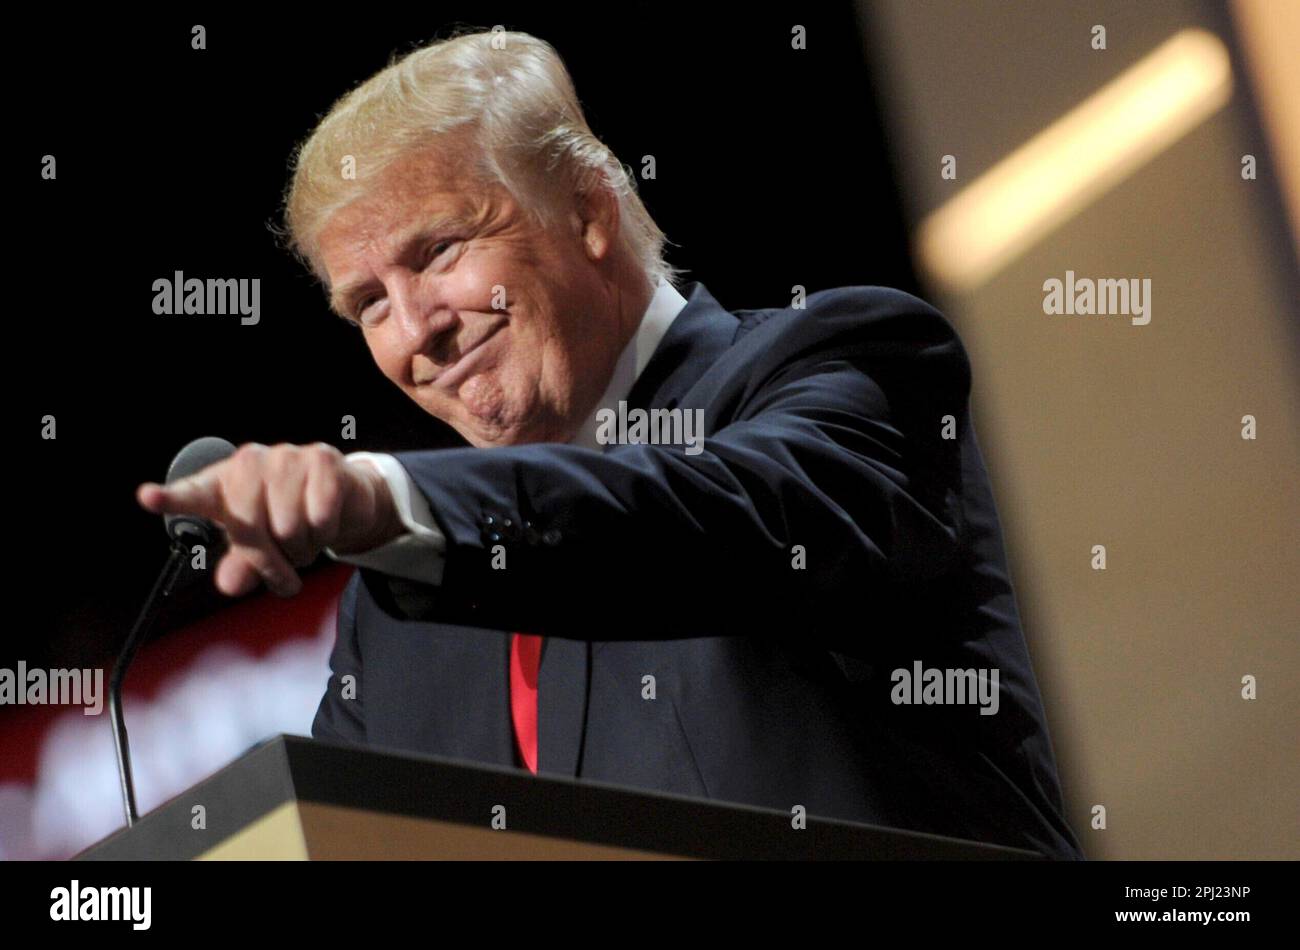 Photo by: Dennis Van Tine/STAR MAX/IPx 2023 3/30/23 Donald Trump indicted on criminal charges in hush money payment case. STAR MAX File Photo: 7/21/16 Donald Trump at day 4 of The Republican National Convention. (Cleveland, Ohio) Stock Photo